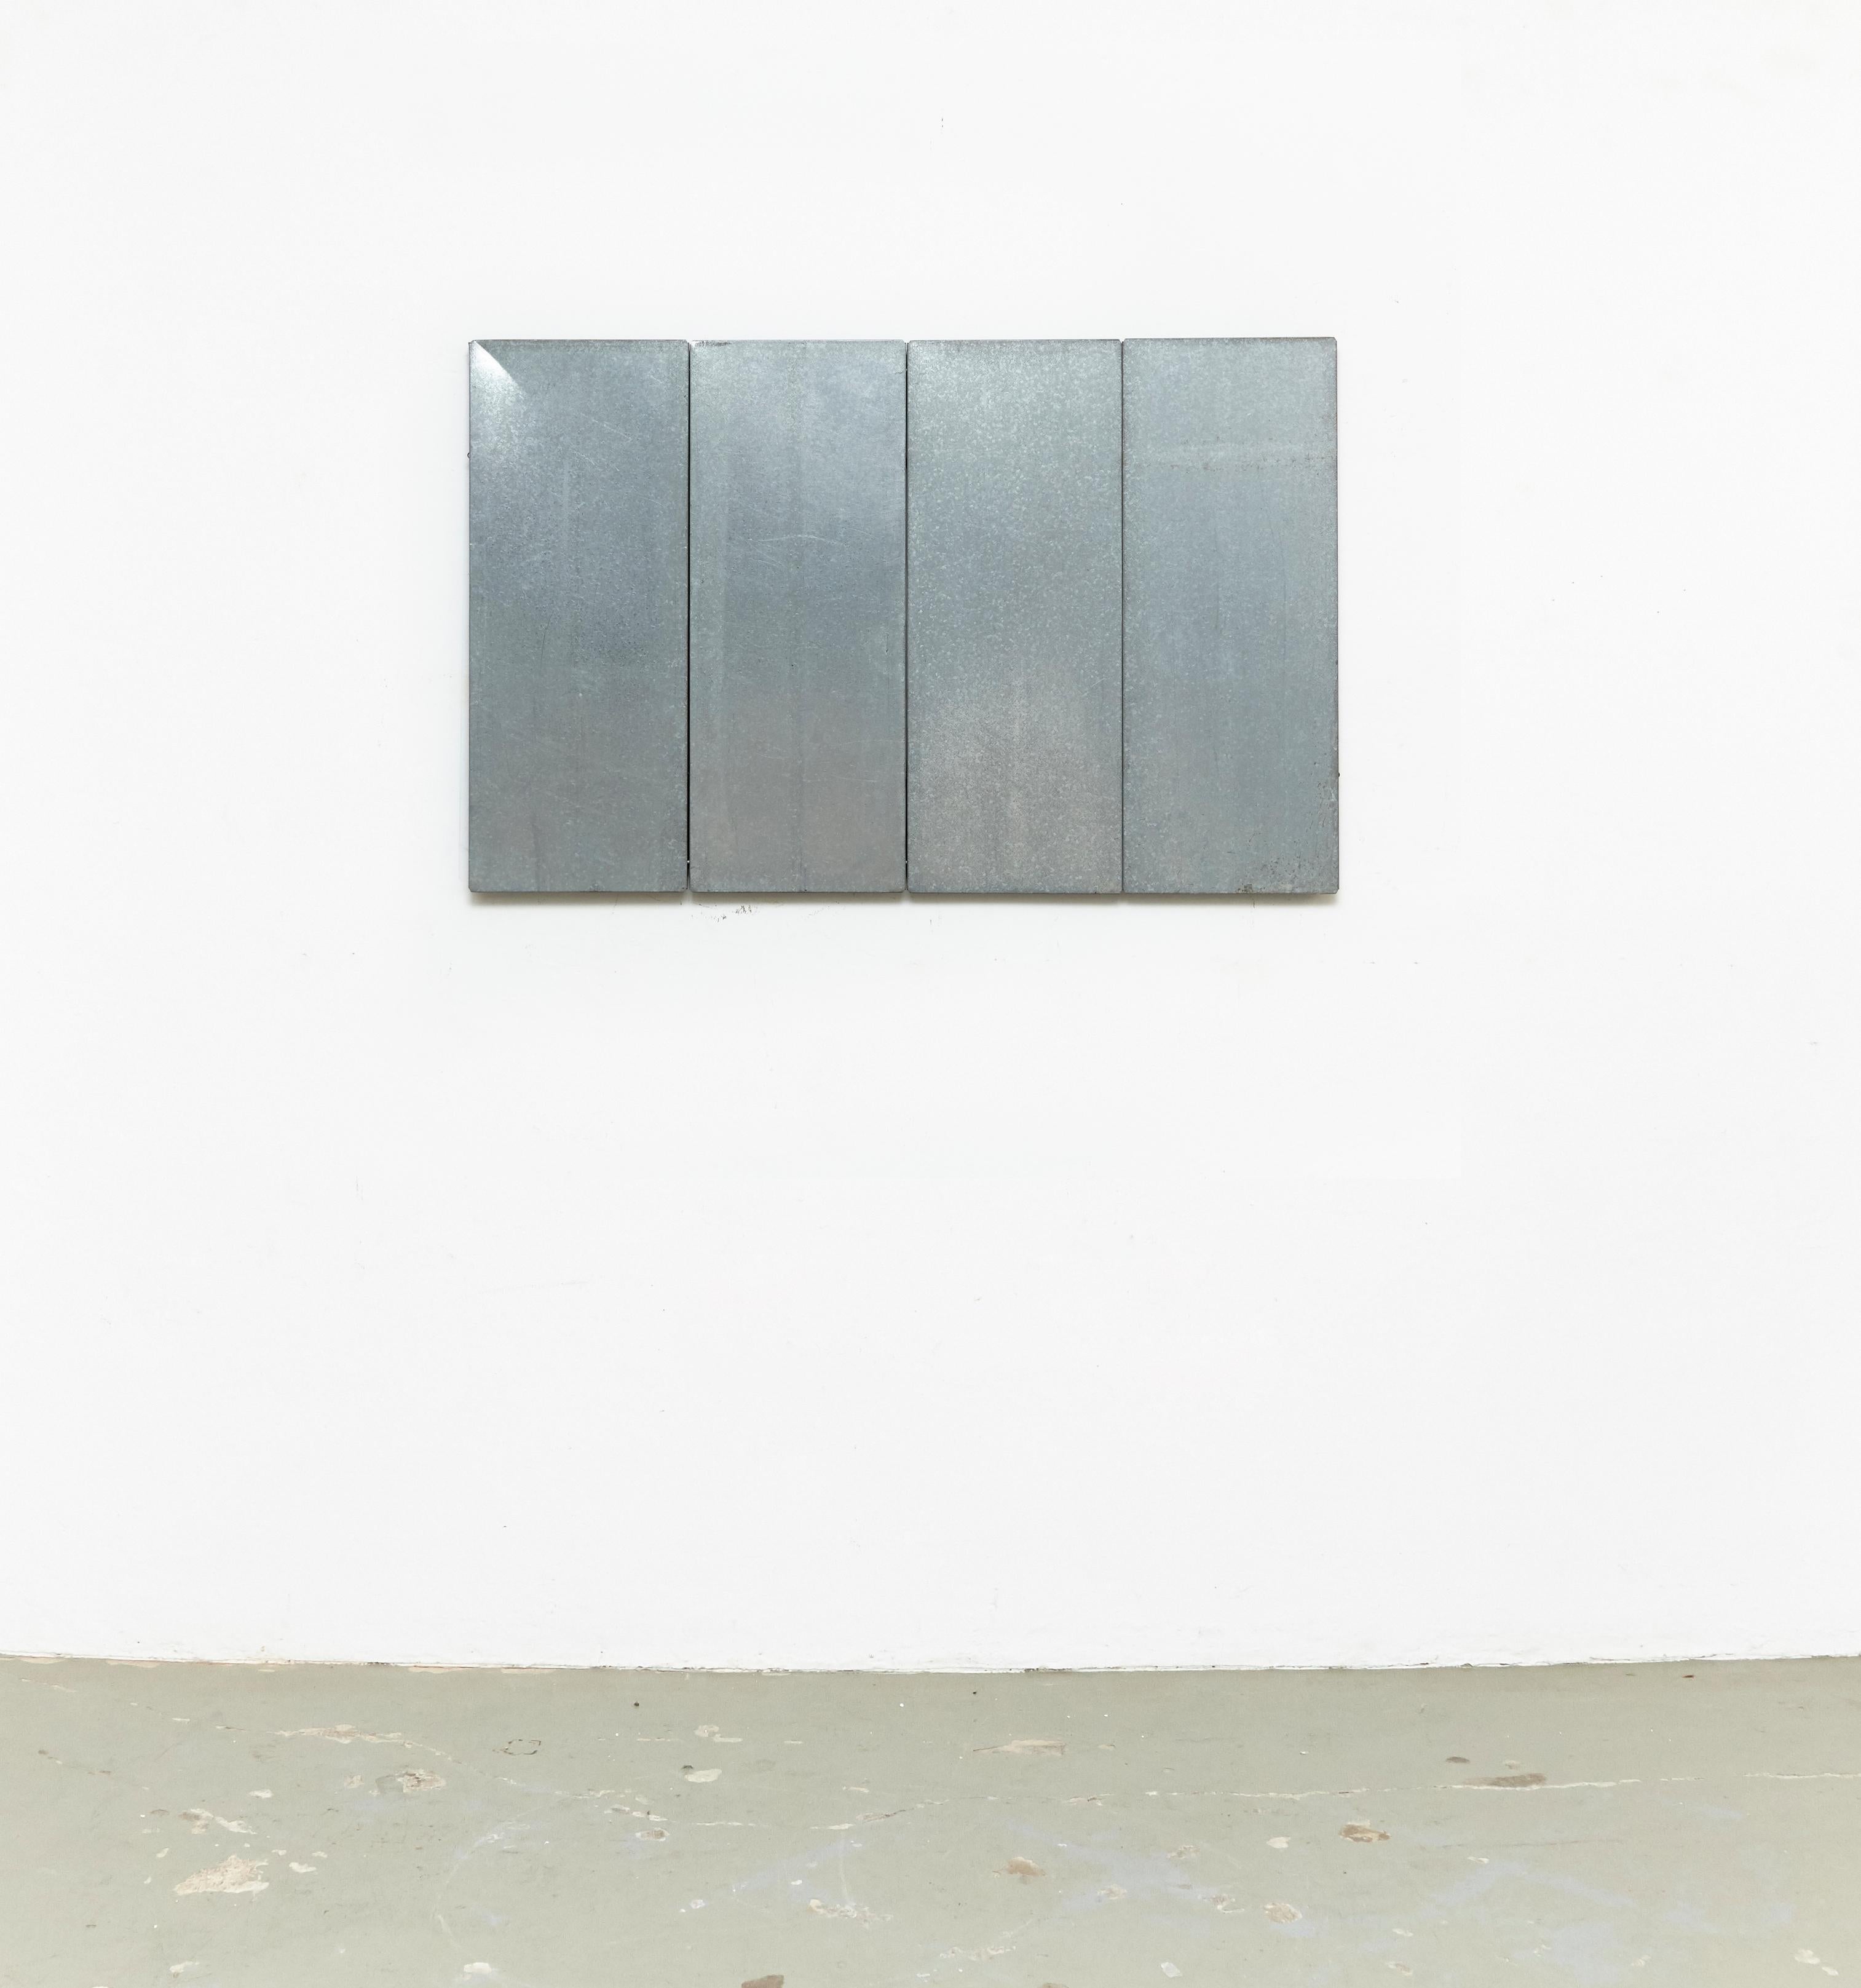 Ramon Horts, Minimalist large artwork.

Structures of metal compositions made in Barcelona, circa 2016. For a solo exhibition.
Signed by himself in engraving punch.

In original condition.

Scraped metal, rusted and varnished.

 